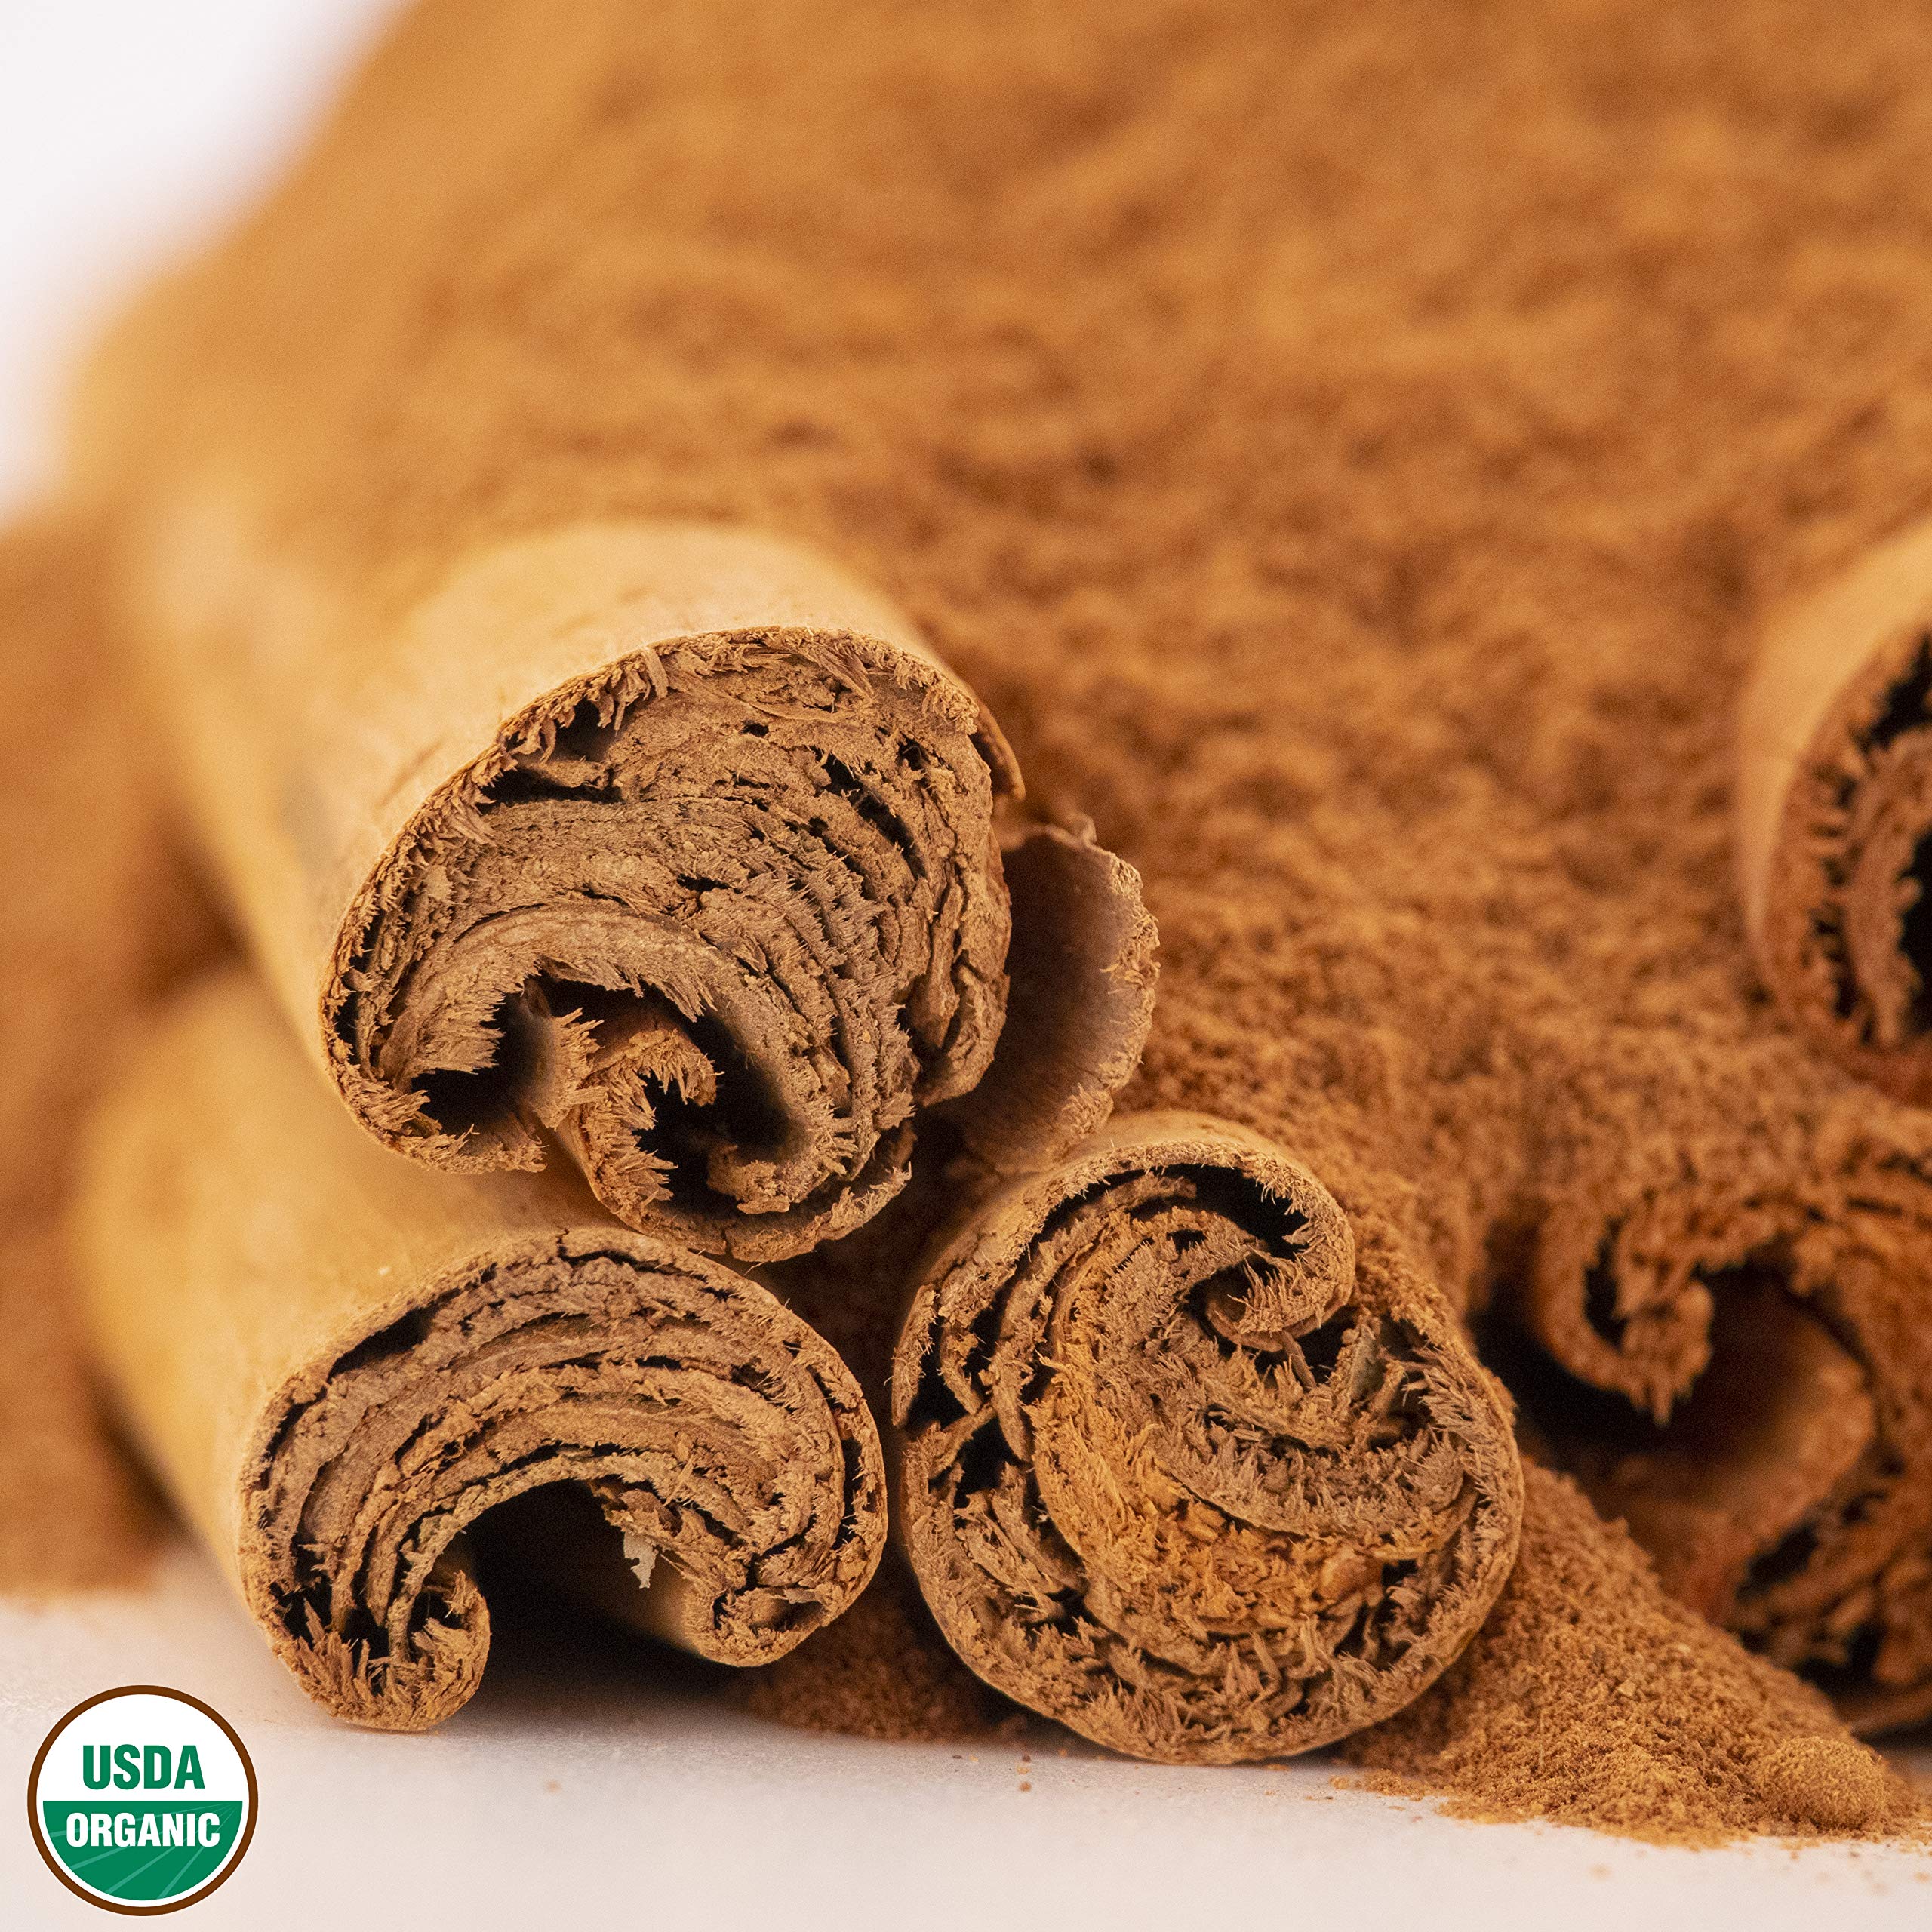 Ceylon Cinnamon Powder (1LB) | 100% CERTIFIED Organic | Freshly Ground Premium Sri Lanka Cinnamon For Exquisite Flavor and Aroma | Gluten Free & Non-GMO | Controlled and Packed in USA Food Facility